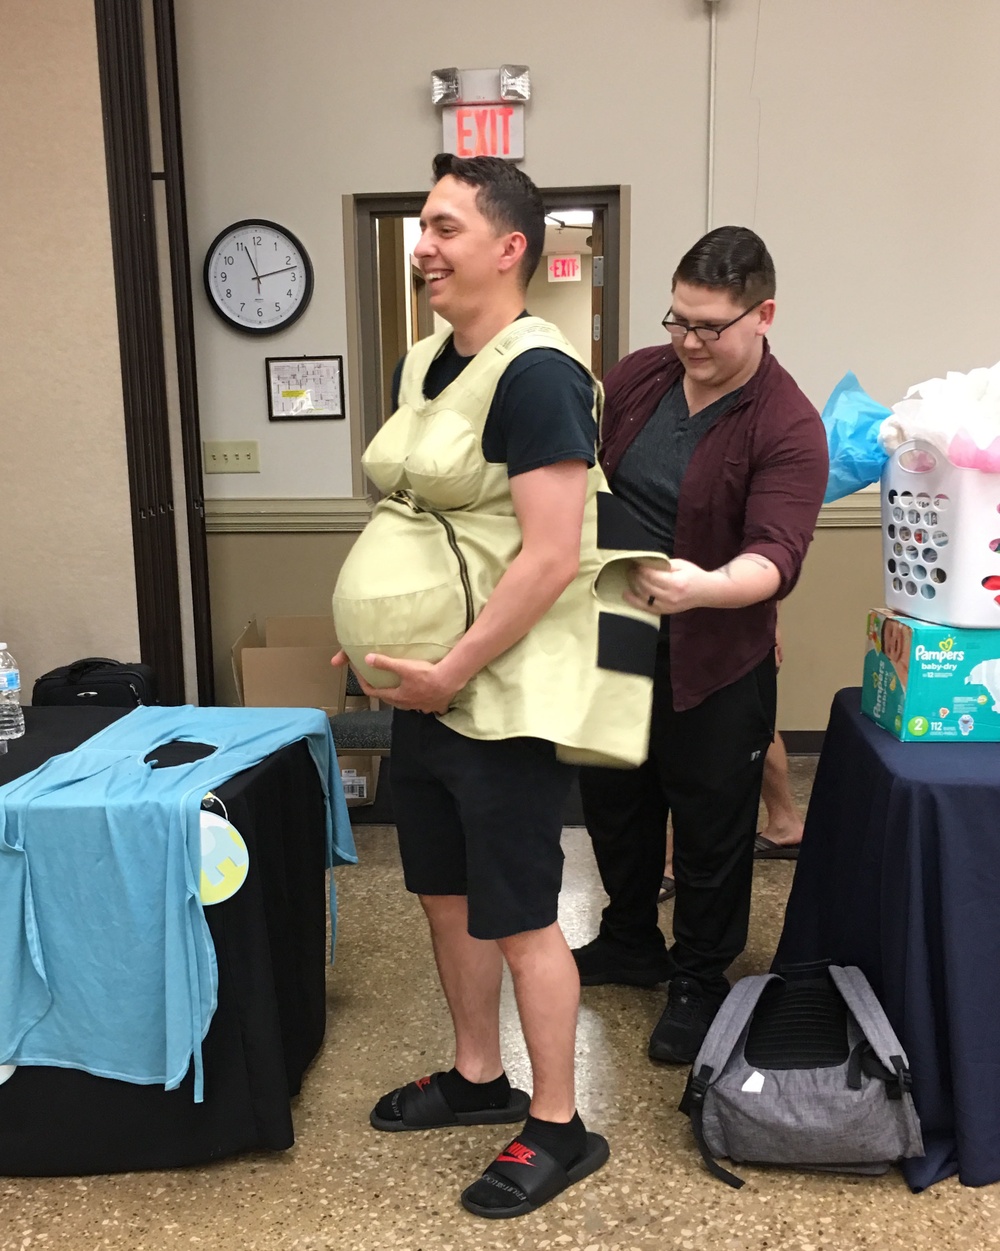 BACH Baby Expo provides military families with one-stop information fair